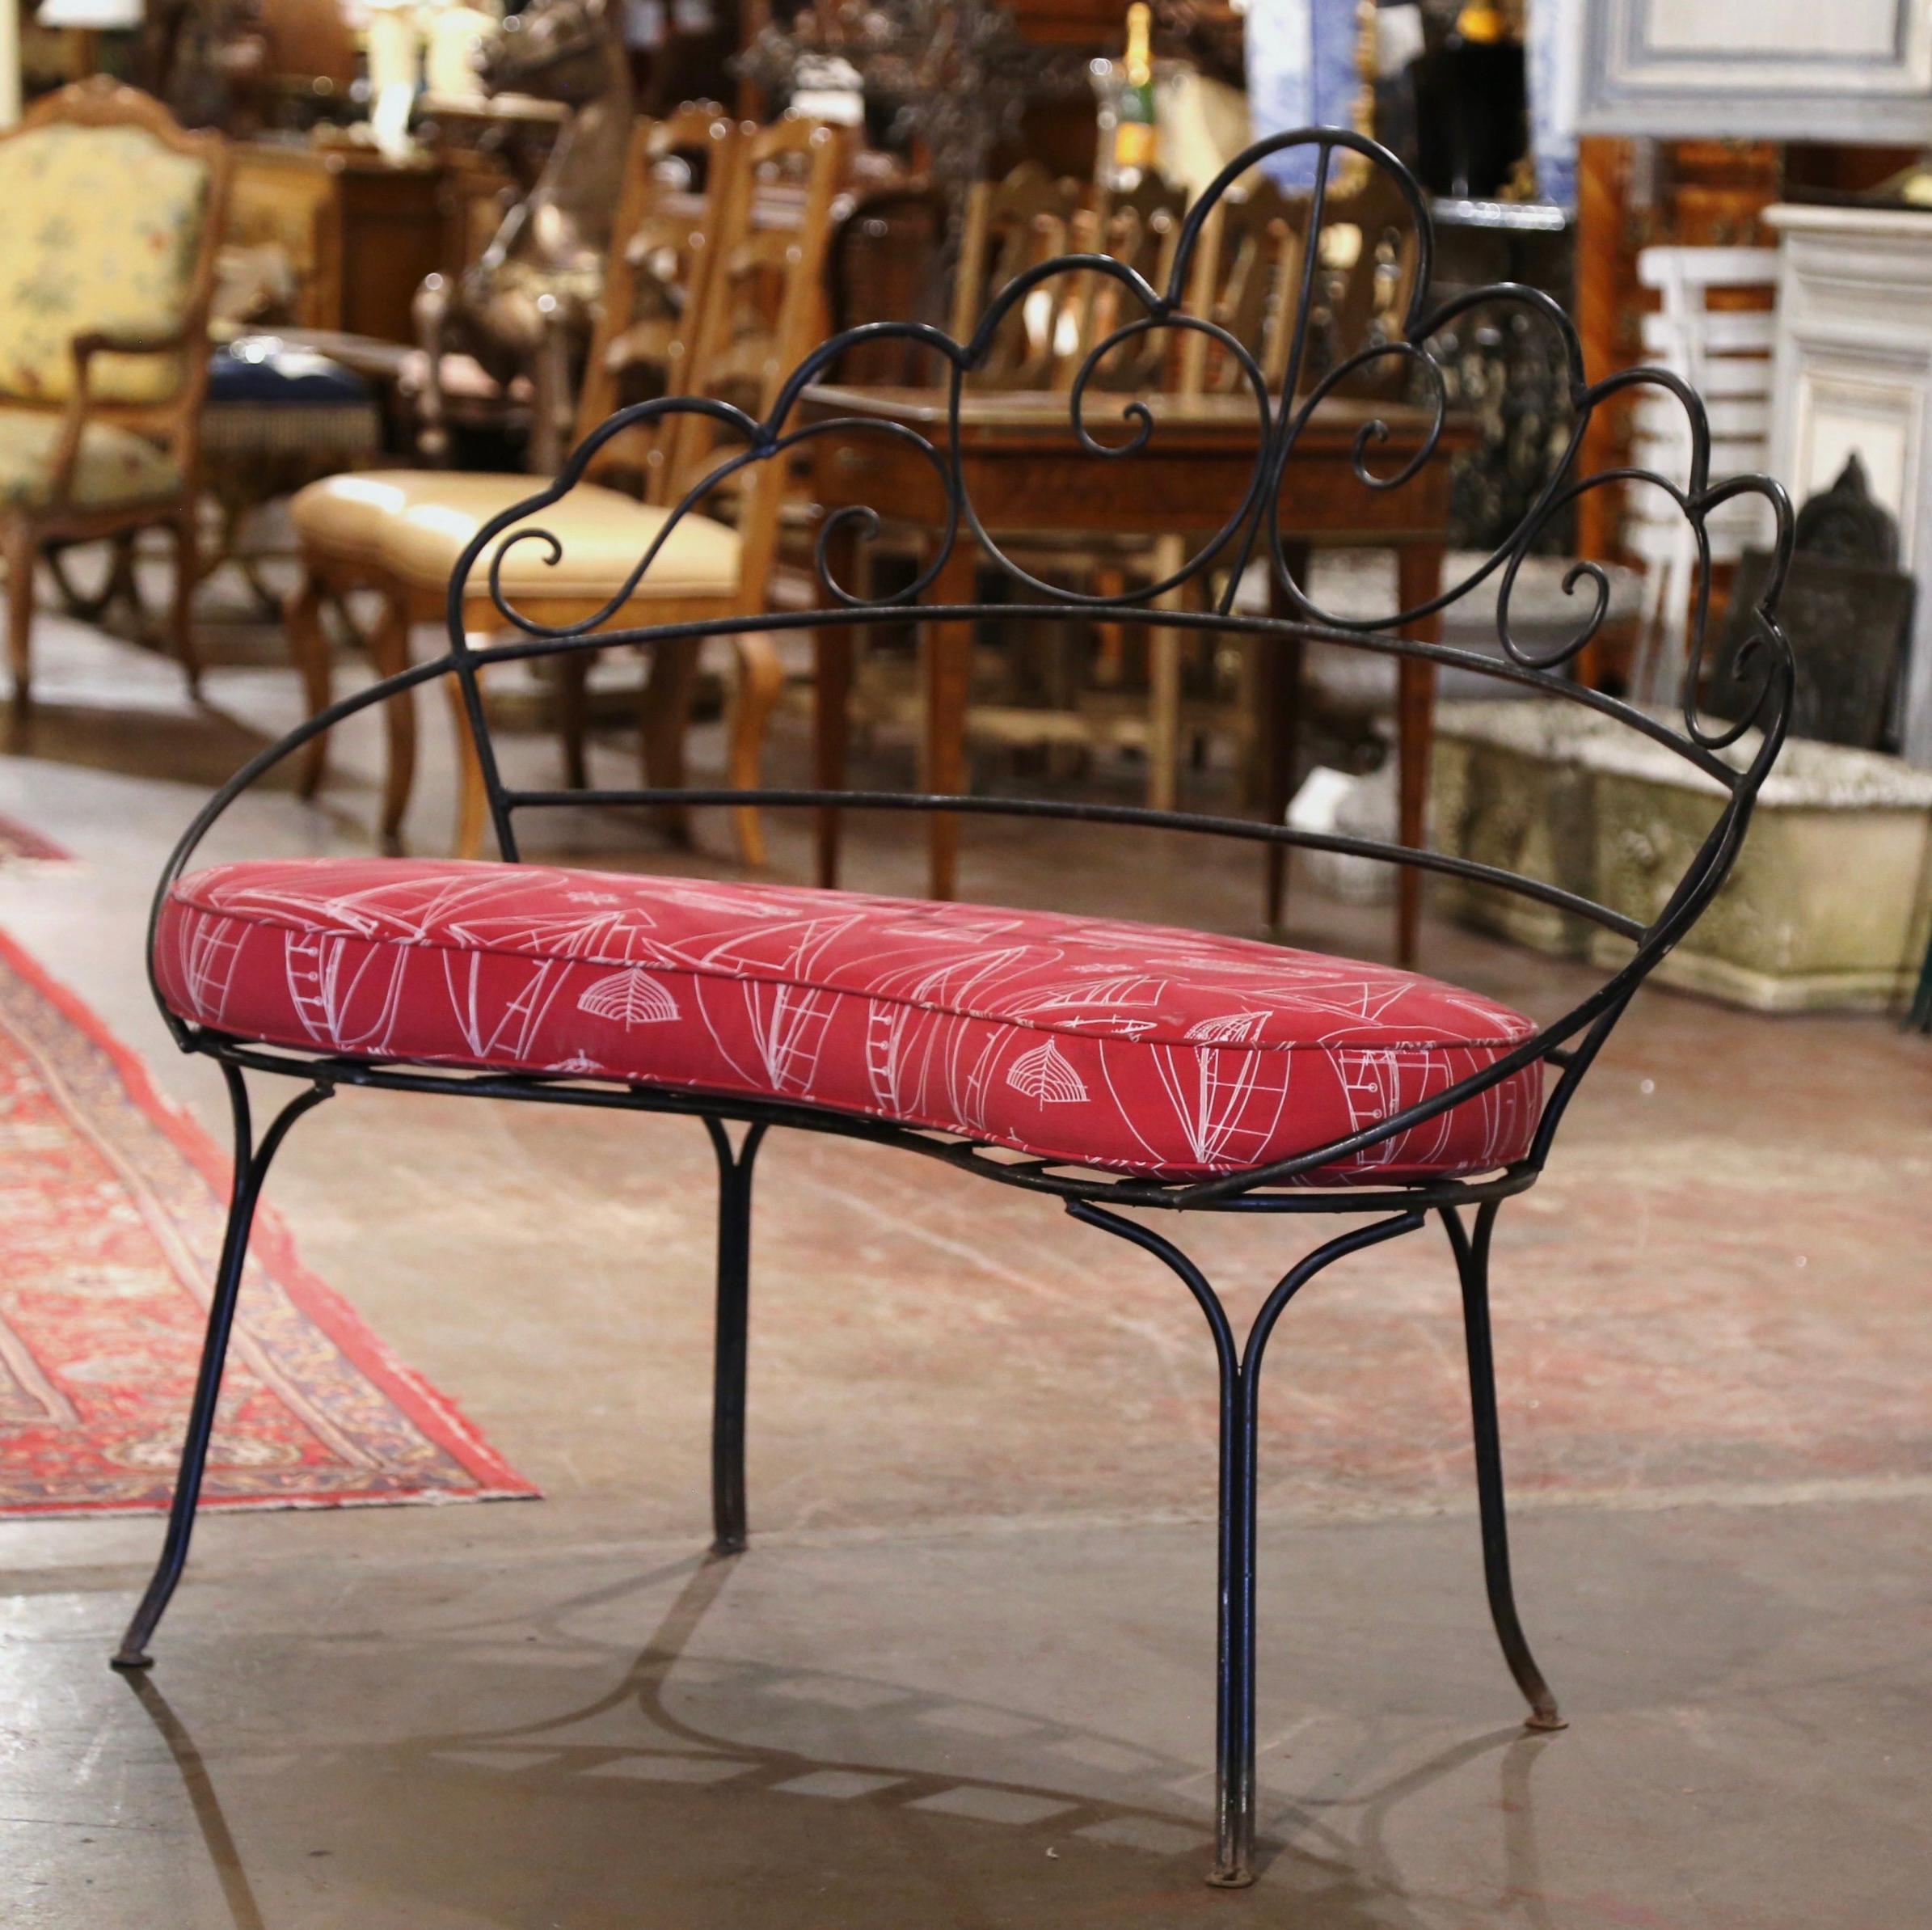 Add extra seating to an outdoor space, porch or patio with this elegant antique iron bench. Crafted in northern France circa 1920, the rounded bench sits on four curved legs. The delicate garden bench has gracious lines and a beautifully shaped back